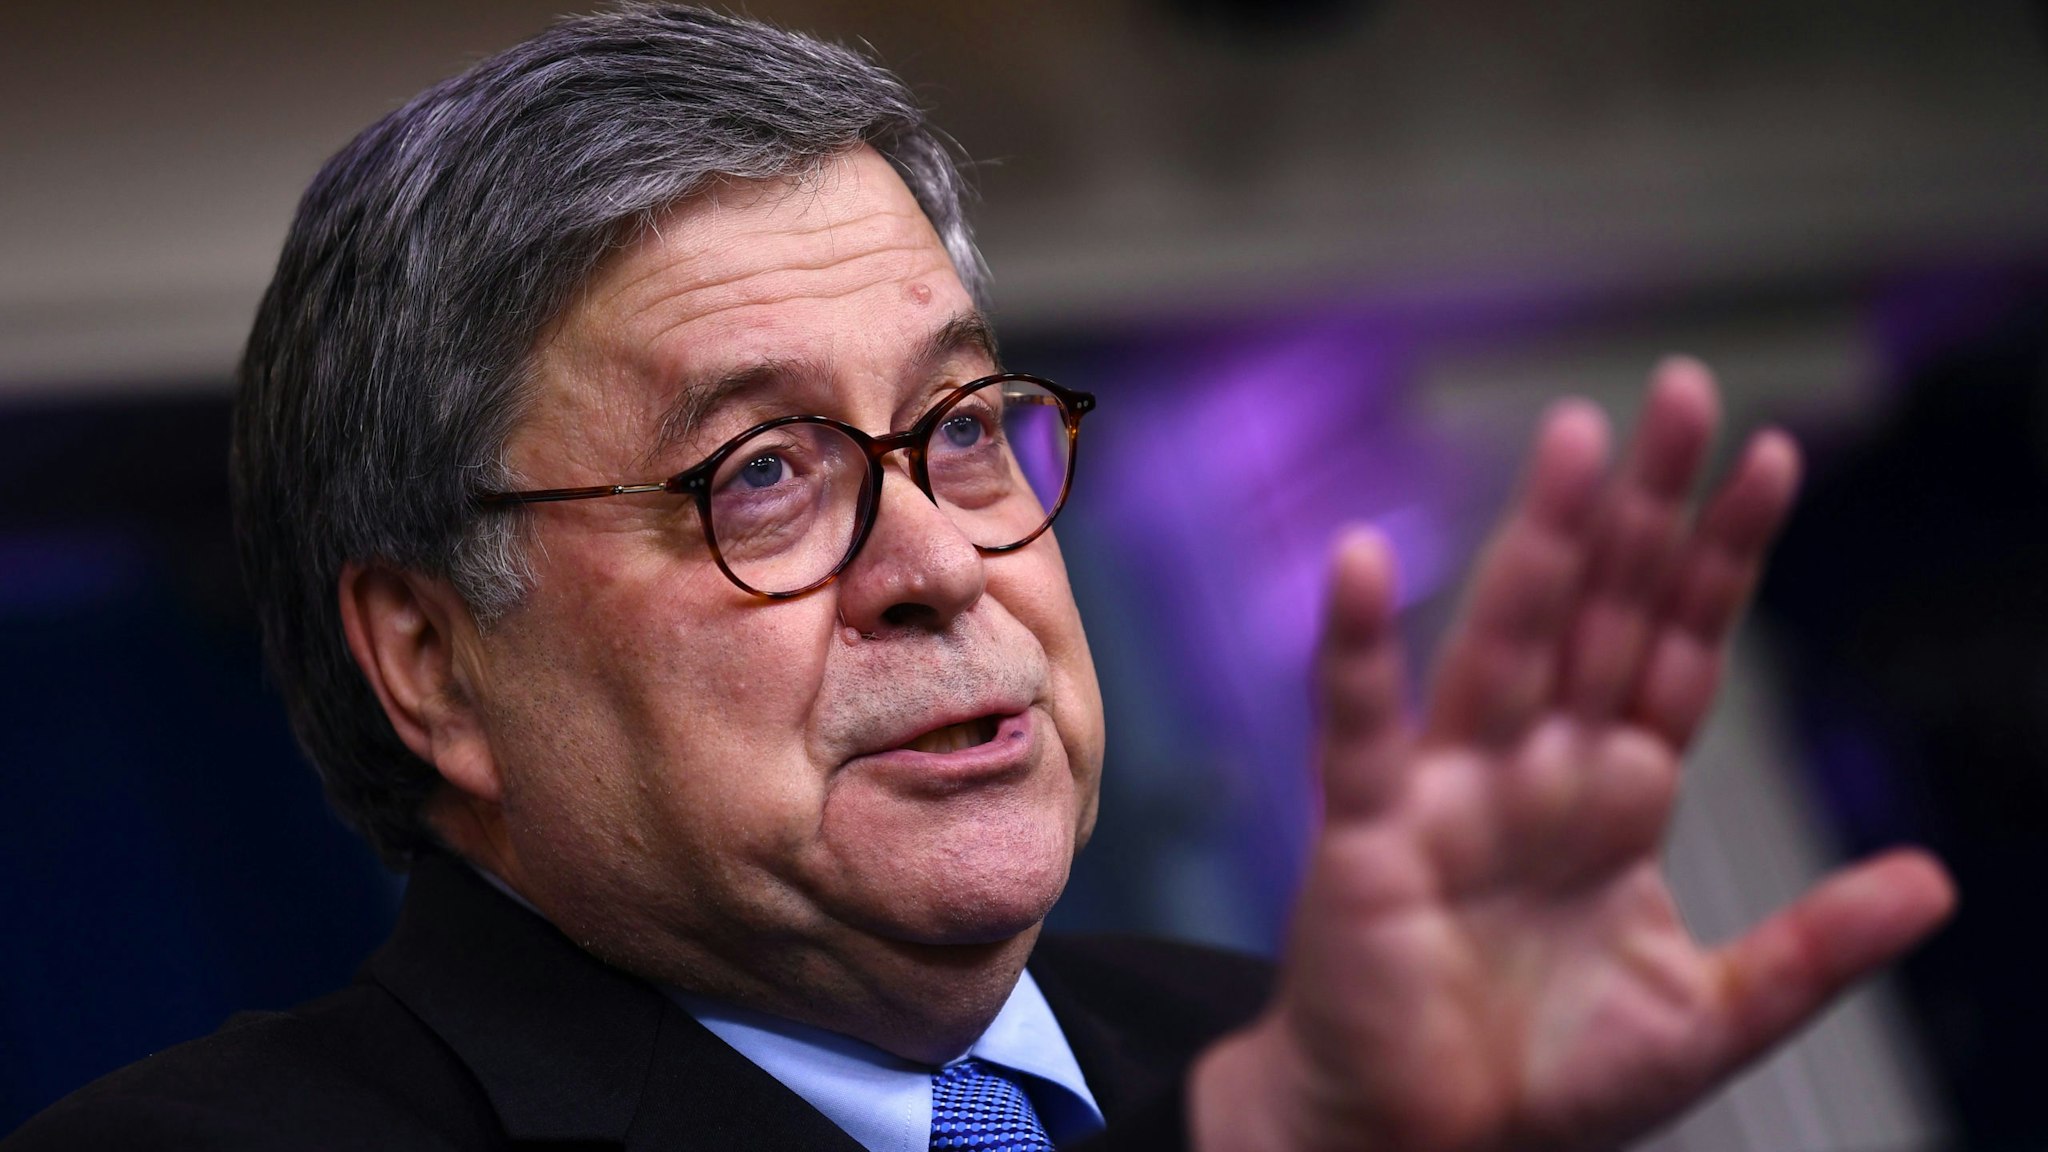 US Attorney General William Barr gestures as he speaks during the daily briefing on the novel coronavirus, COVID-19, at the White House, March 23, 2020, in Washington, DC.